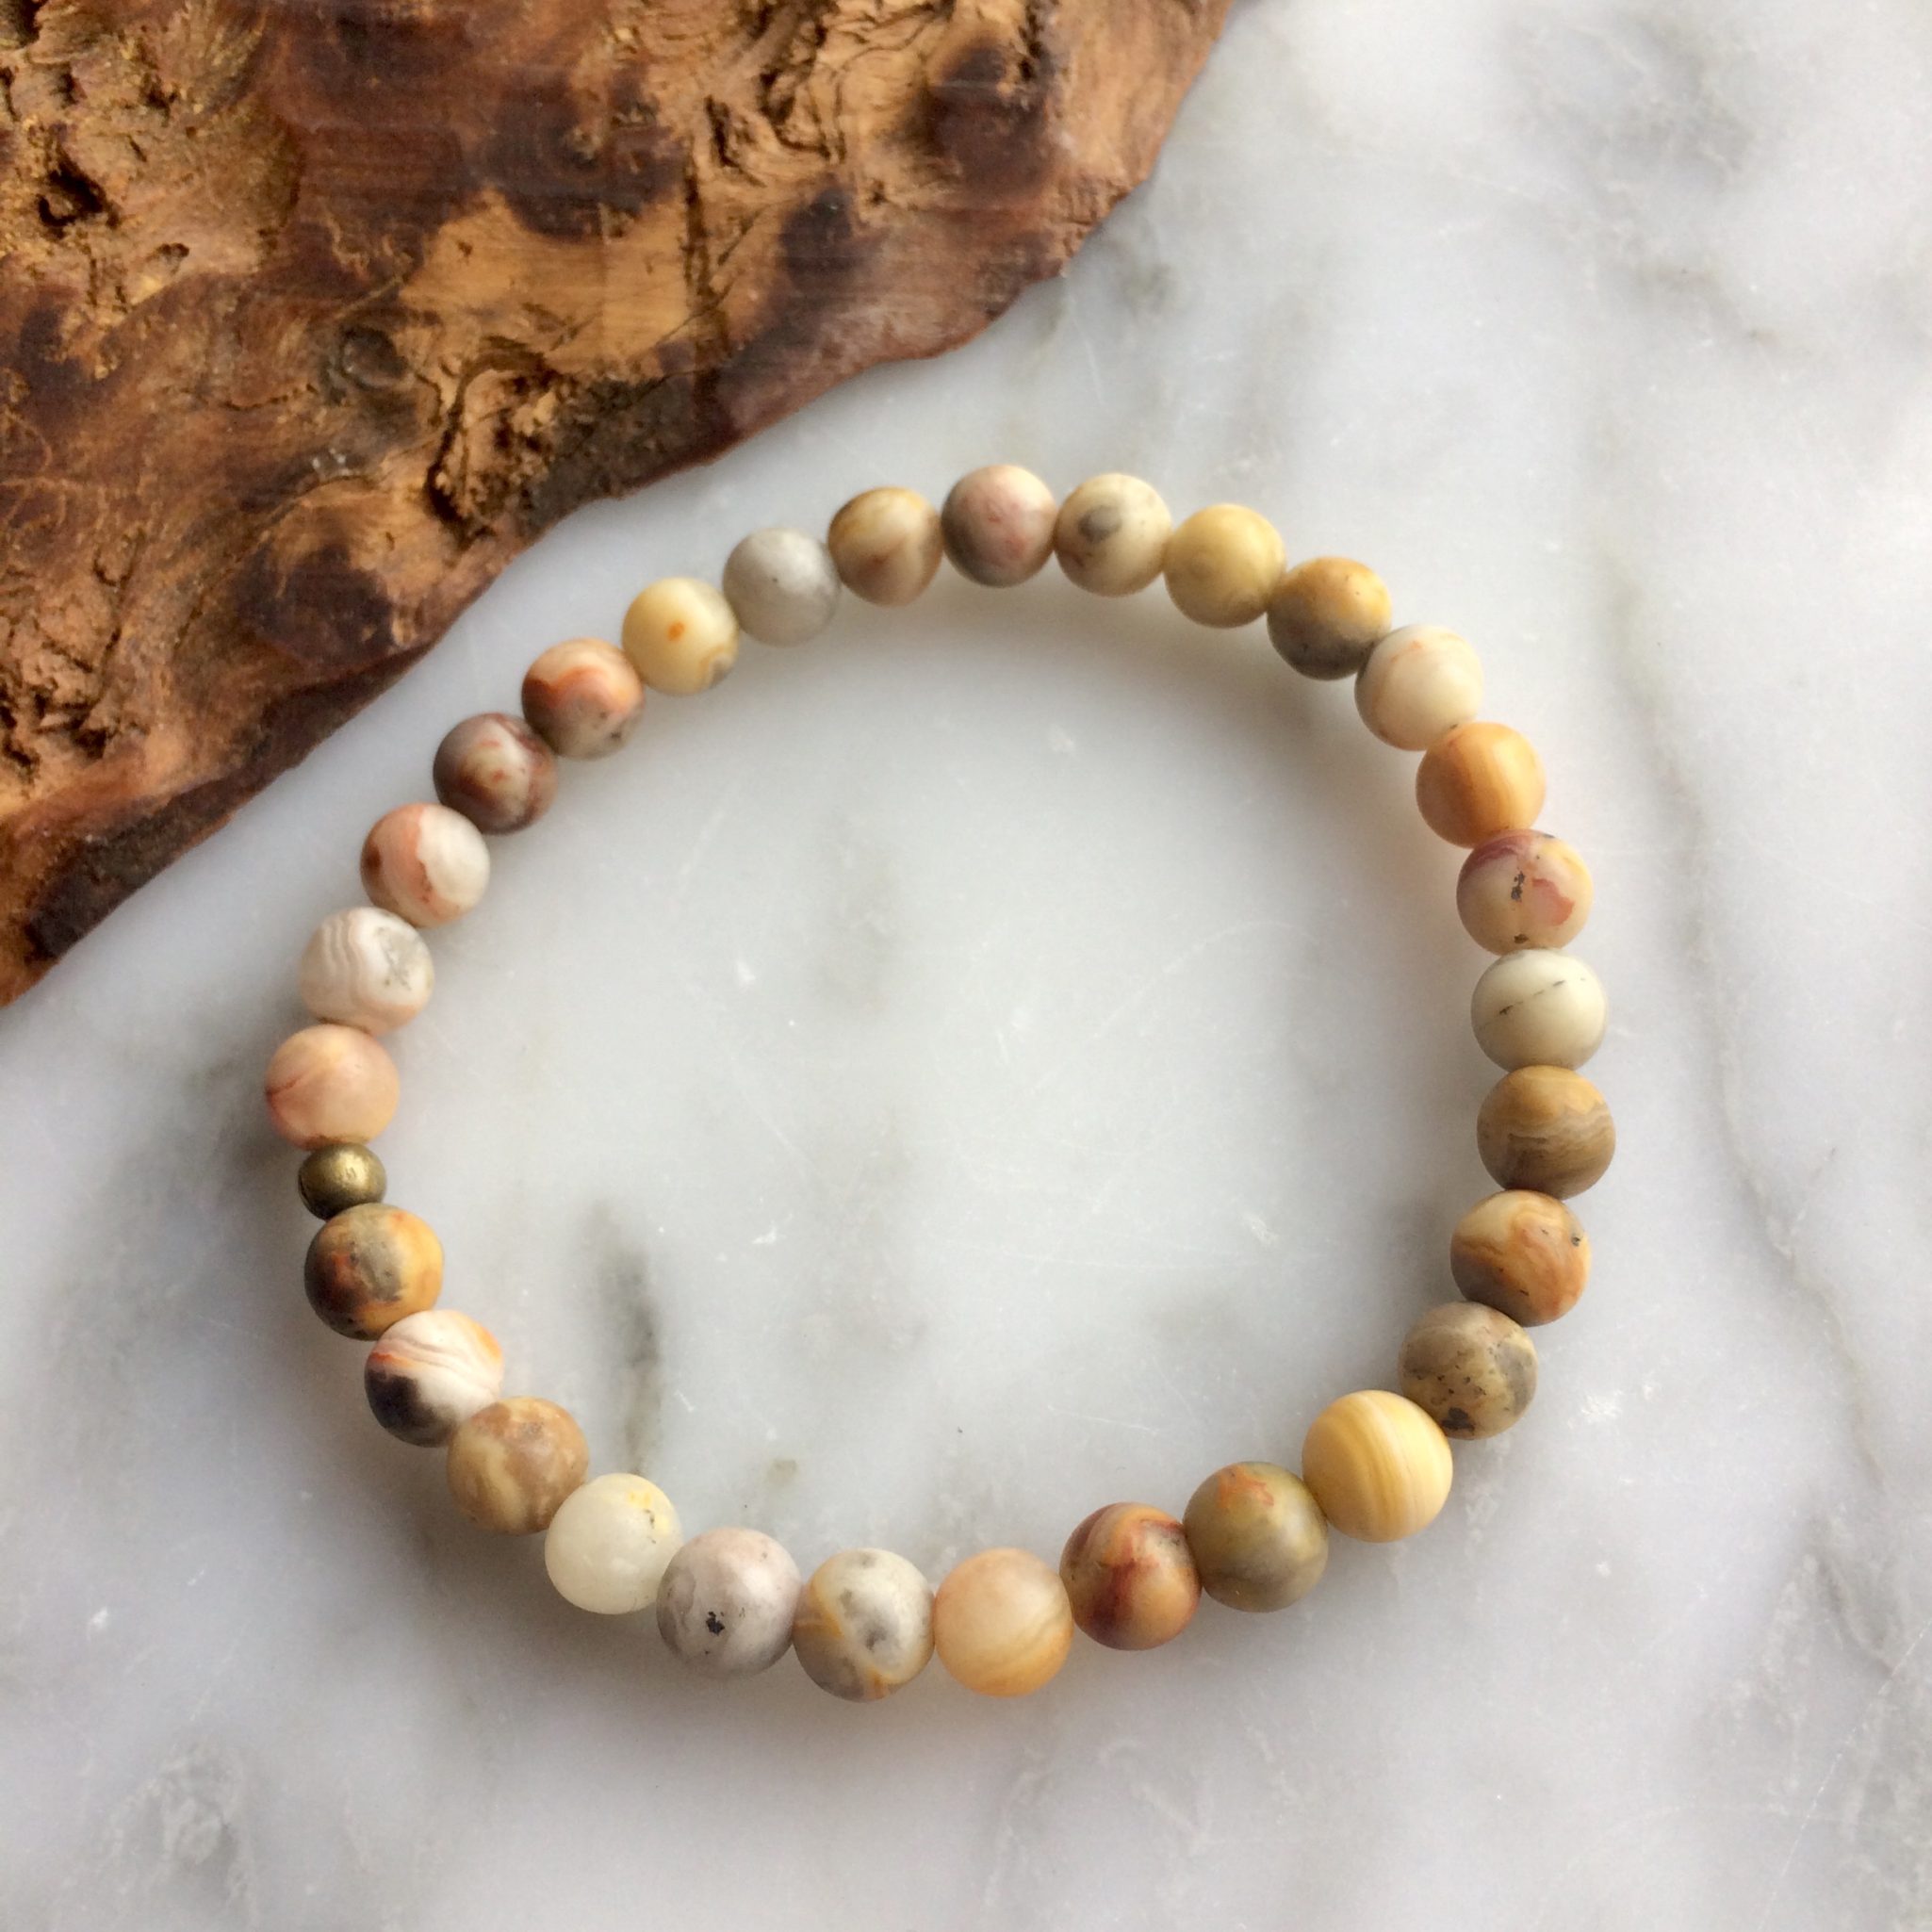 Crazy Lace Agate with Stainless Steel Bracelet Unisex Bracelet Strong Stretch Bracelet 8mm Bracelet gifts for Him and Her Energy Healing Bracelet 